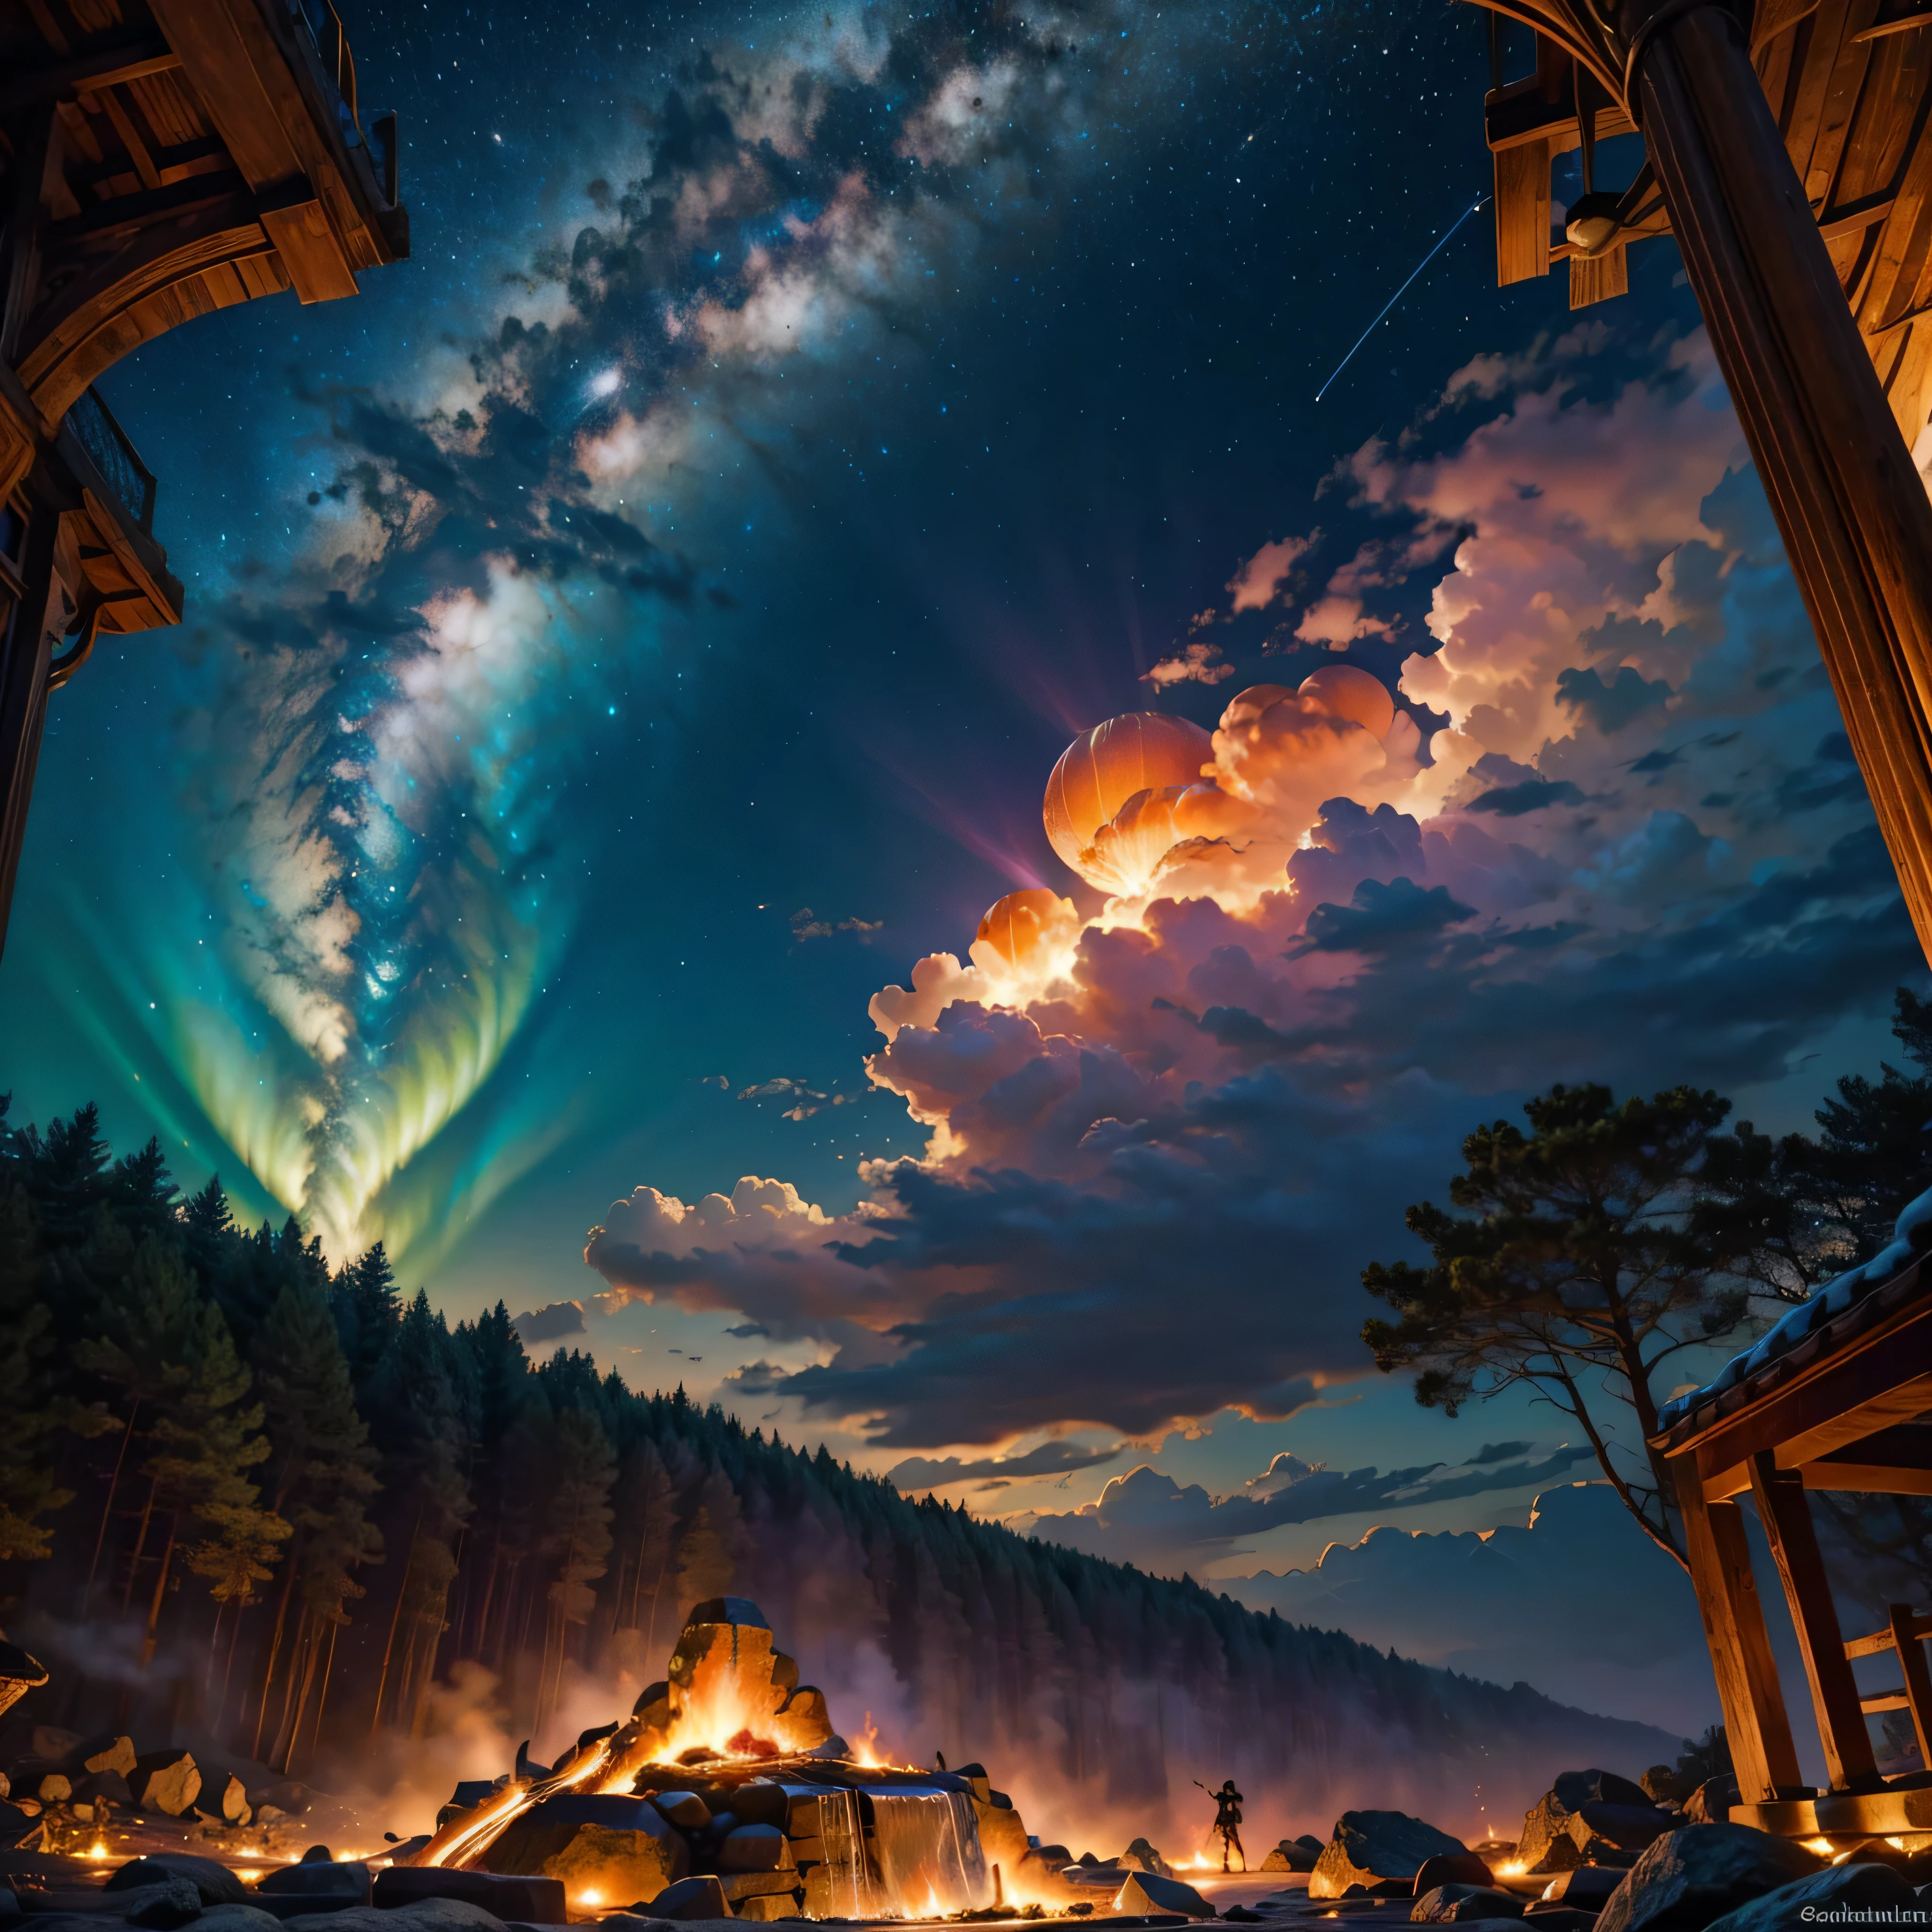 galaxy colorgalaxy stars spacious nebula starry_sky Sunset Colorful SunRise panoramic sunshine, themoon， optic， fanciful，It was dark，storming，salama，in a panoramic view，Photos taken from video games in large cities with a large population, an ancient city on fire, background of invading army, Beautiful rendering of the Three Kingdoms period, The scene of the war, Background: Battle scene, invading army background, The consequences of a big war, heroic battle scene, epic battle scene, Siege ultra_high-def ultra_Photo-realistic optimal ultra_high-quality opengl-shaders ultra_high-details accurate reflex ultra_high-res perfection volumetric lightning improved Octane_rendues UHD XT3 DSLR HDR 3dcg analogiques extatiques symmetrical onyx rubis summon floraison invoque viceroy magic incandescente creature CGSCOSITY butterfly Cristallines Monarch wings sundrop flash blow glow opale straight chrome flat lava bands population Tourmaline plasma "Niagara Falls" hearth glass mirror monster Fire Blast Flame saturate luminescence backlight shadow Chef-D&#39 tattoo Bruce_Weber sex naked nsfw varied multi etc. --s 1000 --c 20 --q 20 --chaos 100